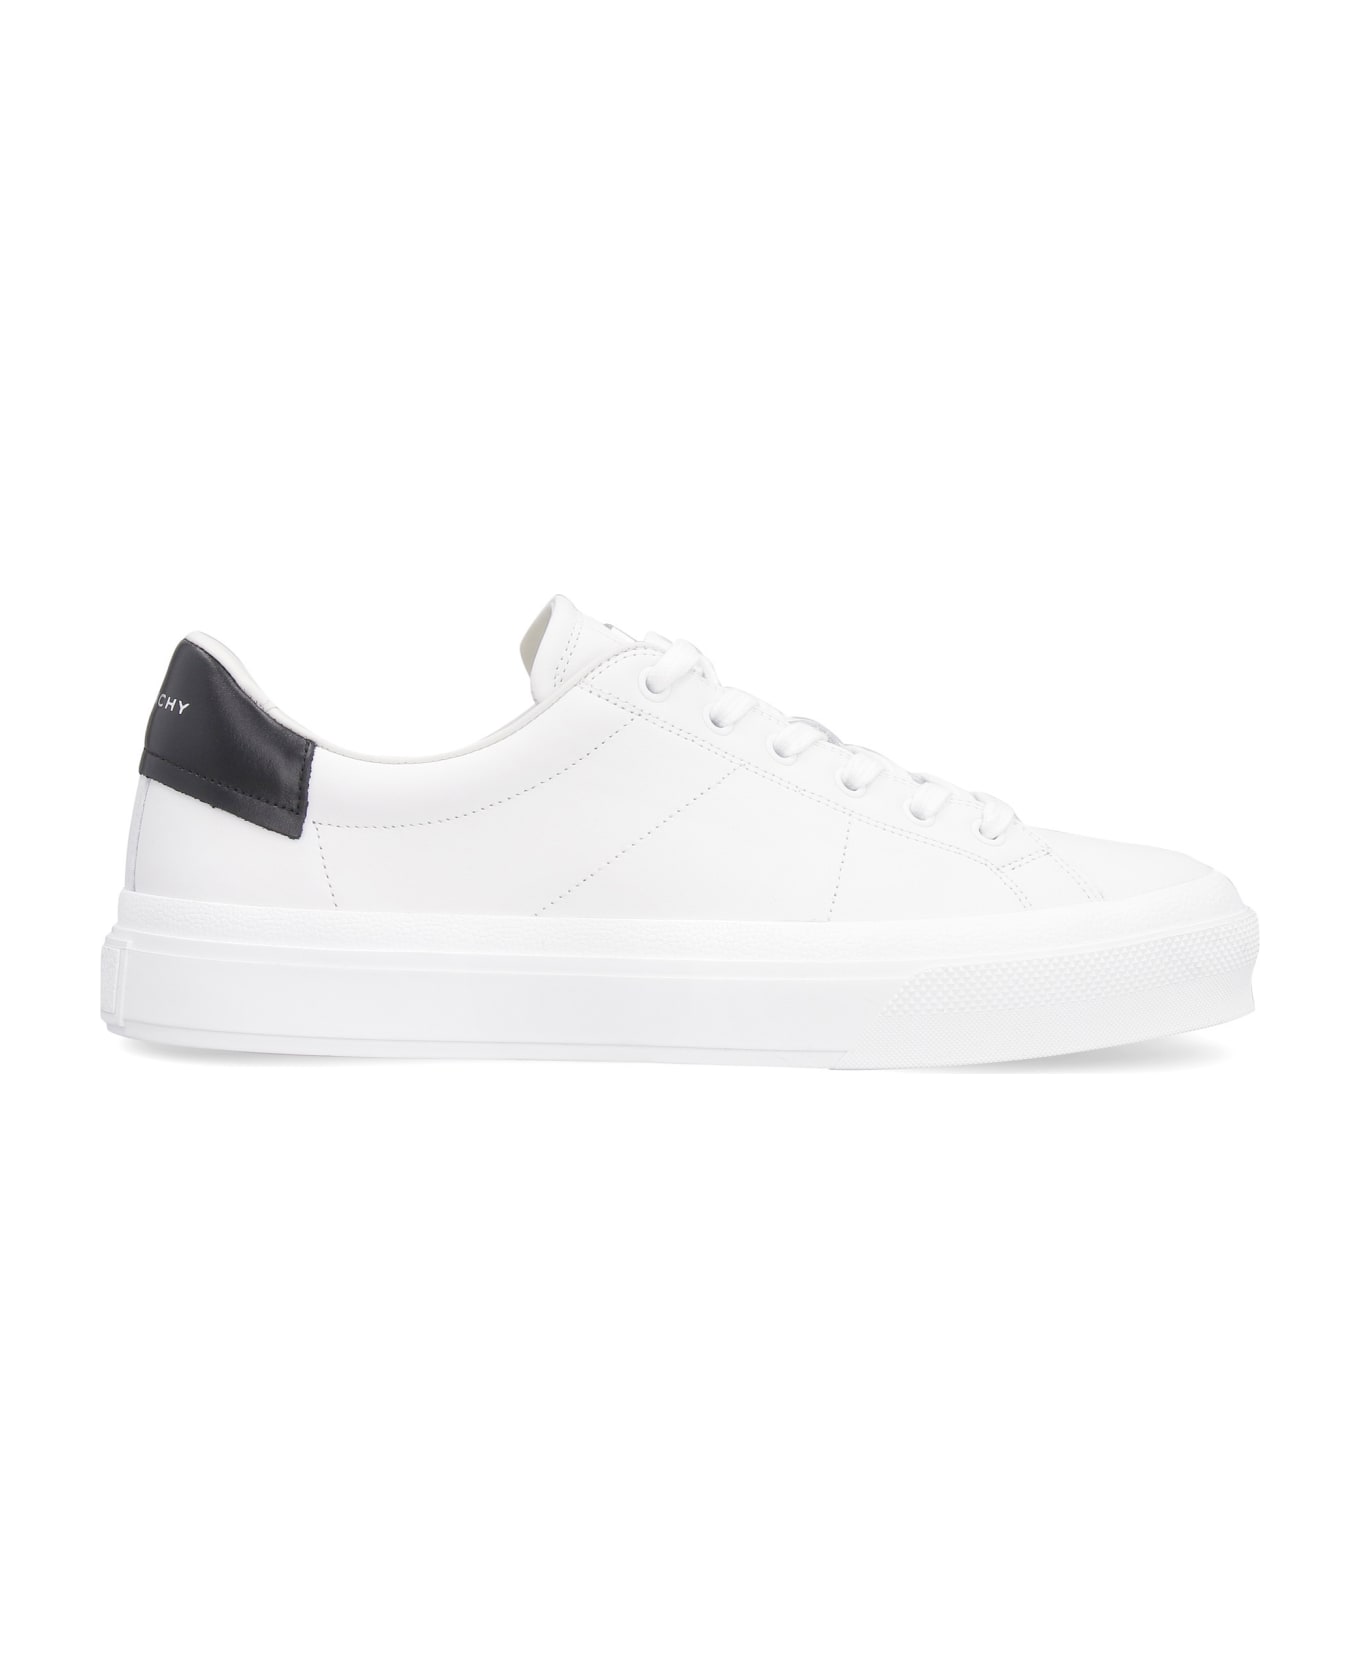 Givenchy City Leather Sneakers - BIANCO/NERO